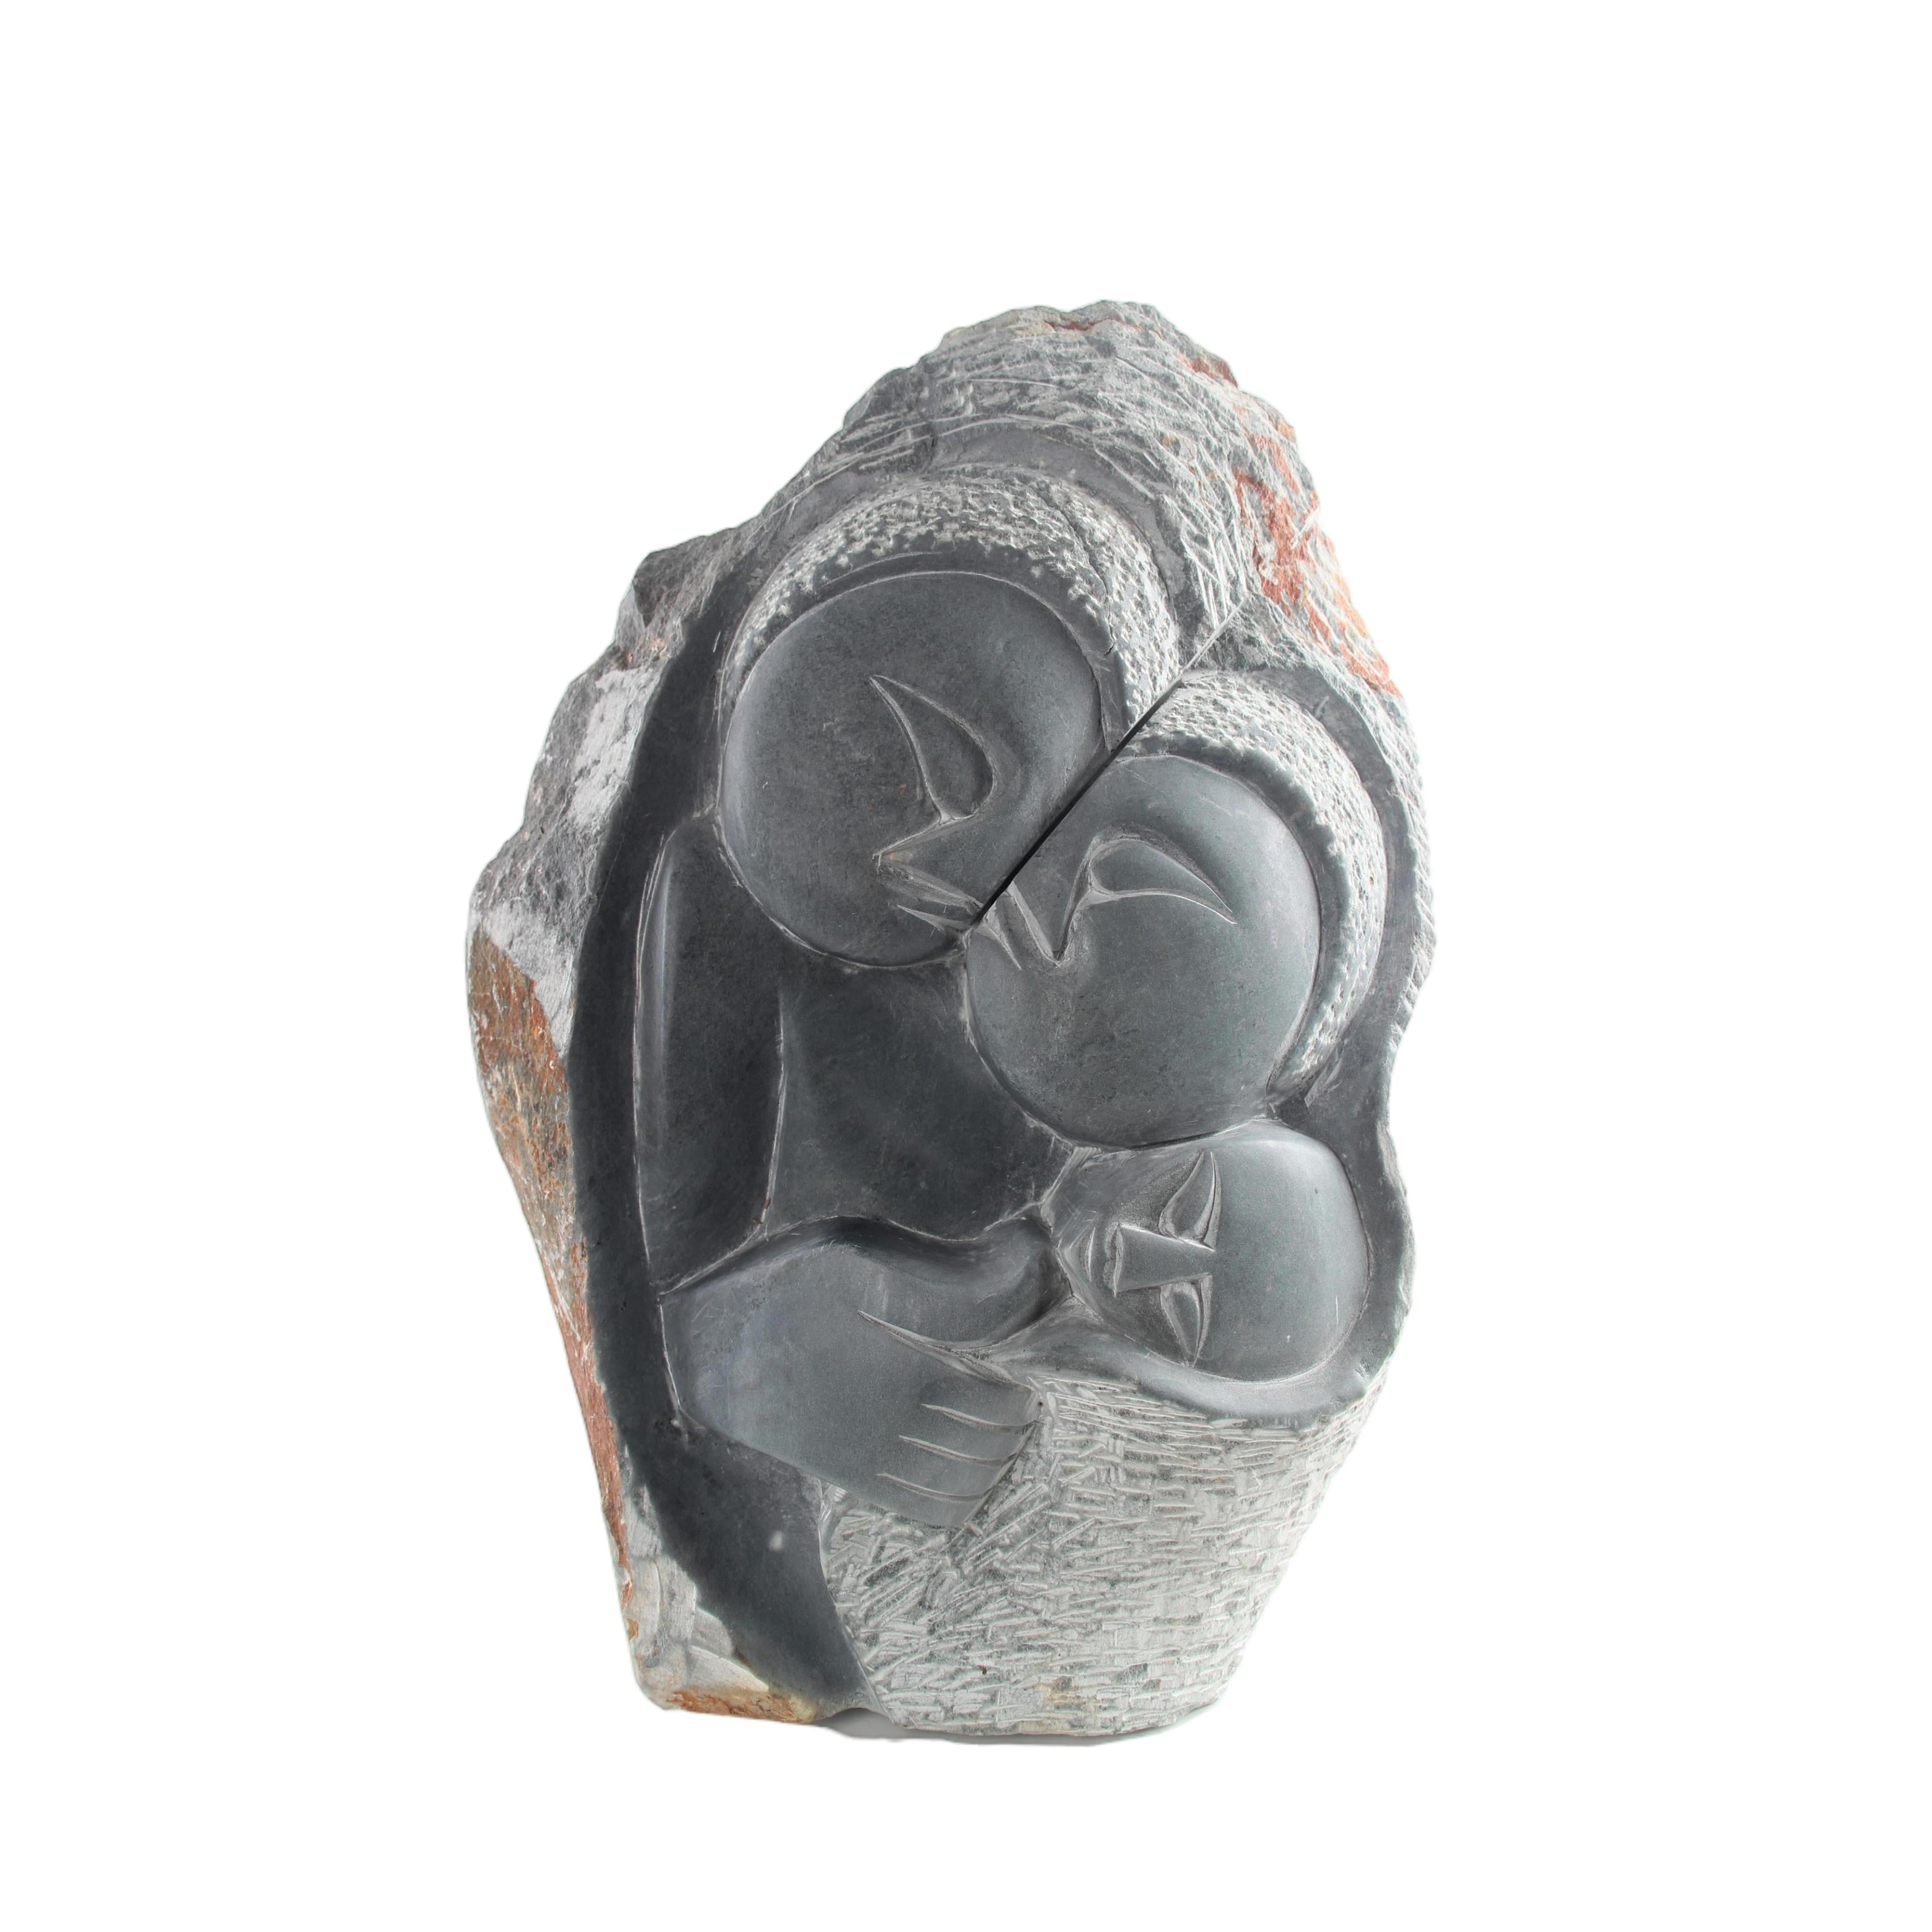 Shona Tribe Serpentine Stone Mother and Children ~13.0" Tall - Mother and Children